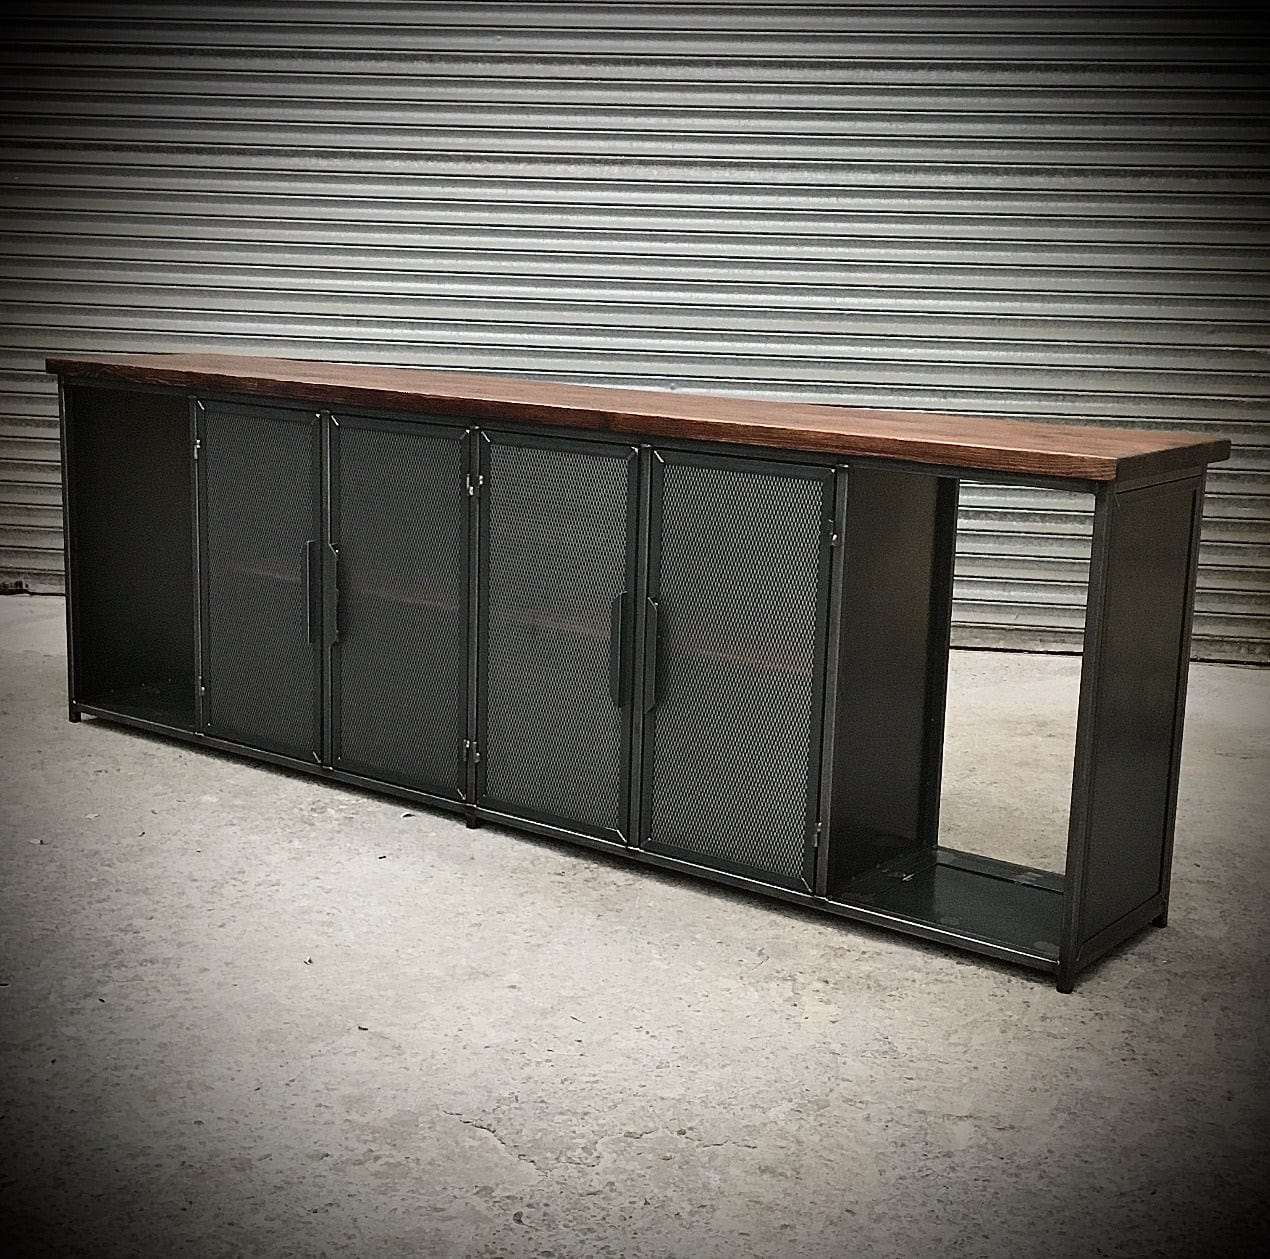 Industrial sideboard with Drinks Cooler - Drinks Cabinet - Home Bar  RSD Furniture   